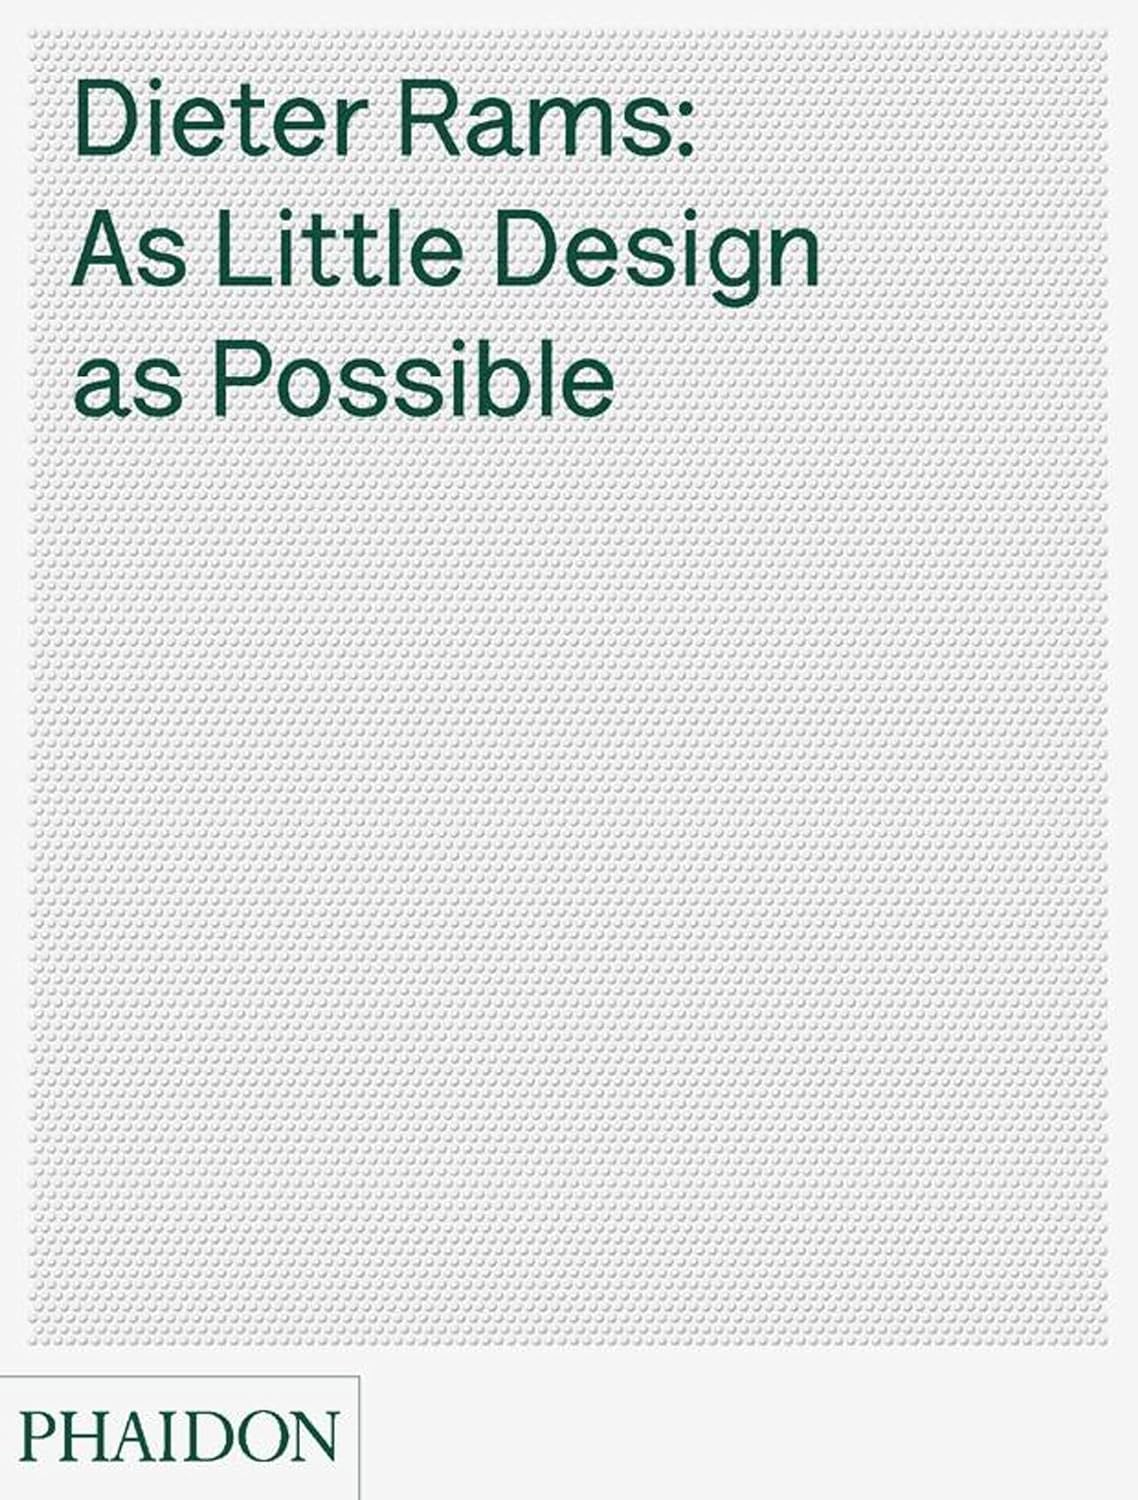 Dieter Rams: As Little Design As Possible - 81sARb8CBlL._SL1500